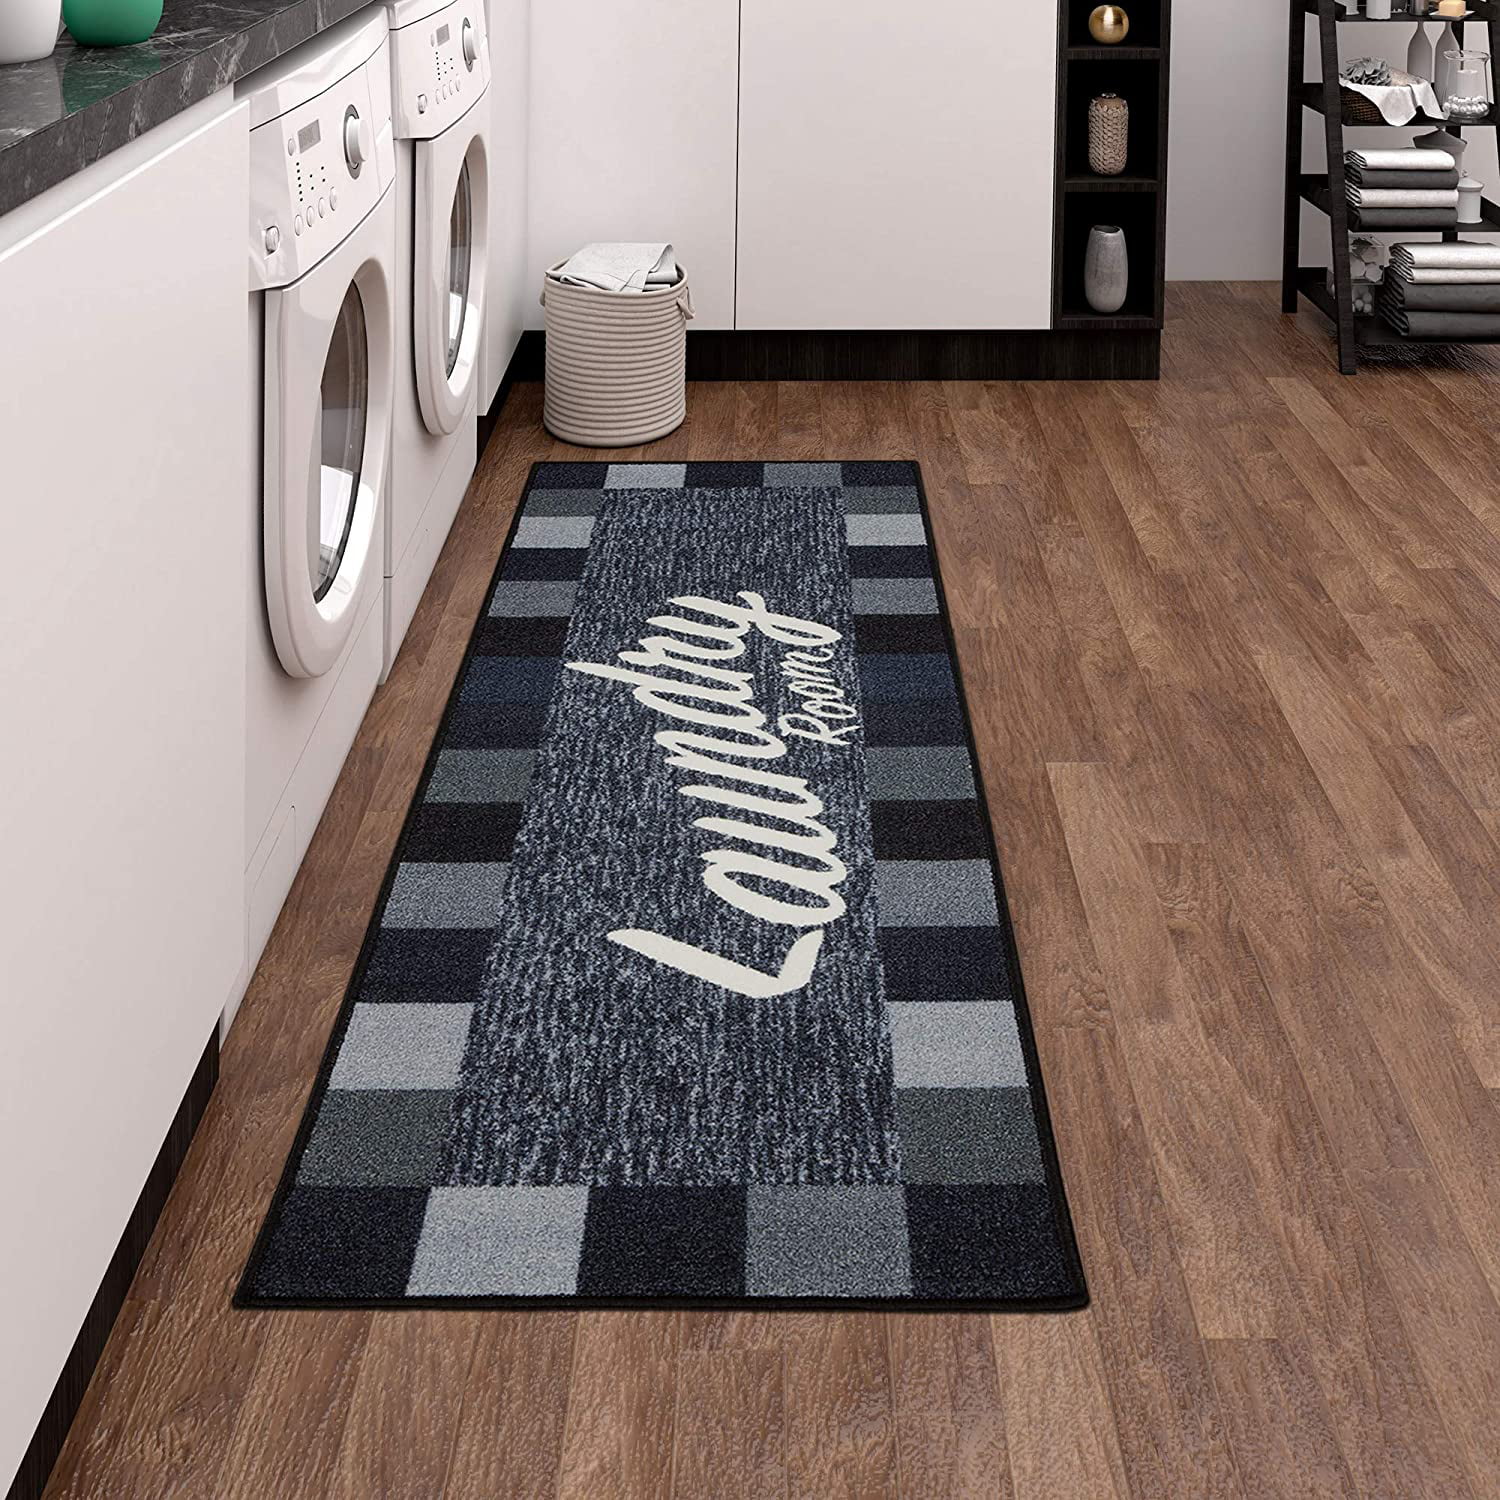 Details about   Rug Runner-Black/Gray Laundry room-Stain & Fade Resistant 20"X59" Rectangular 